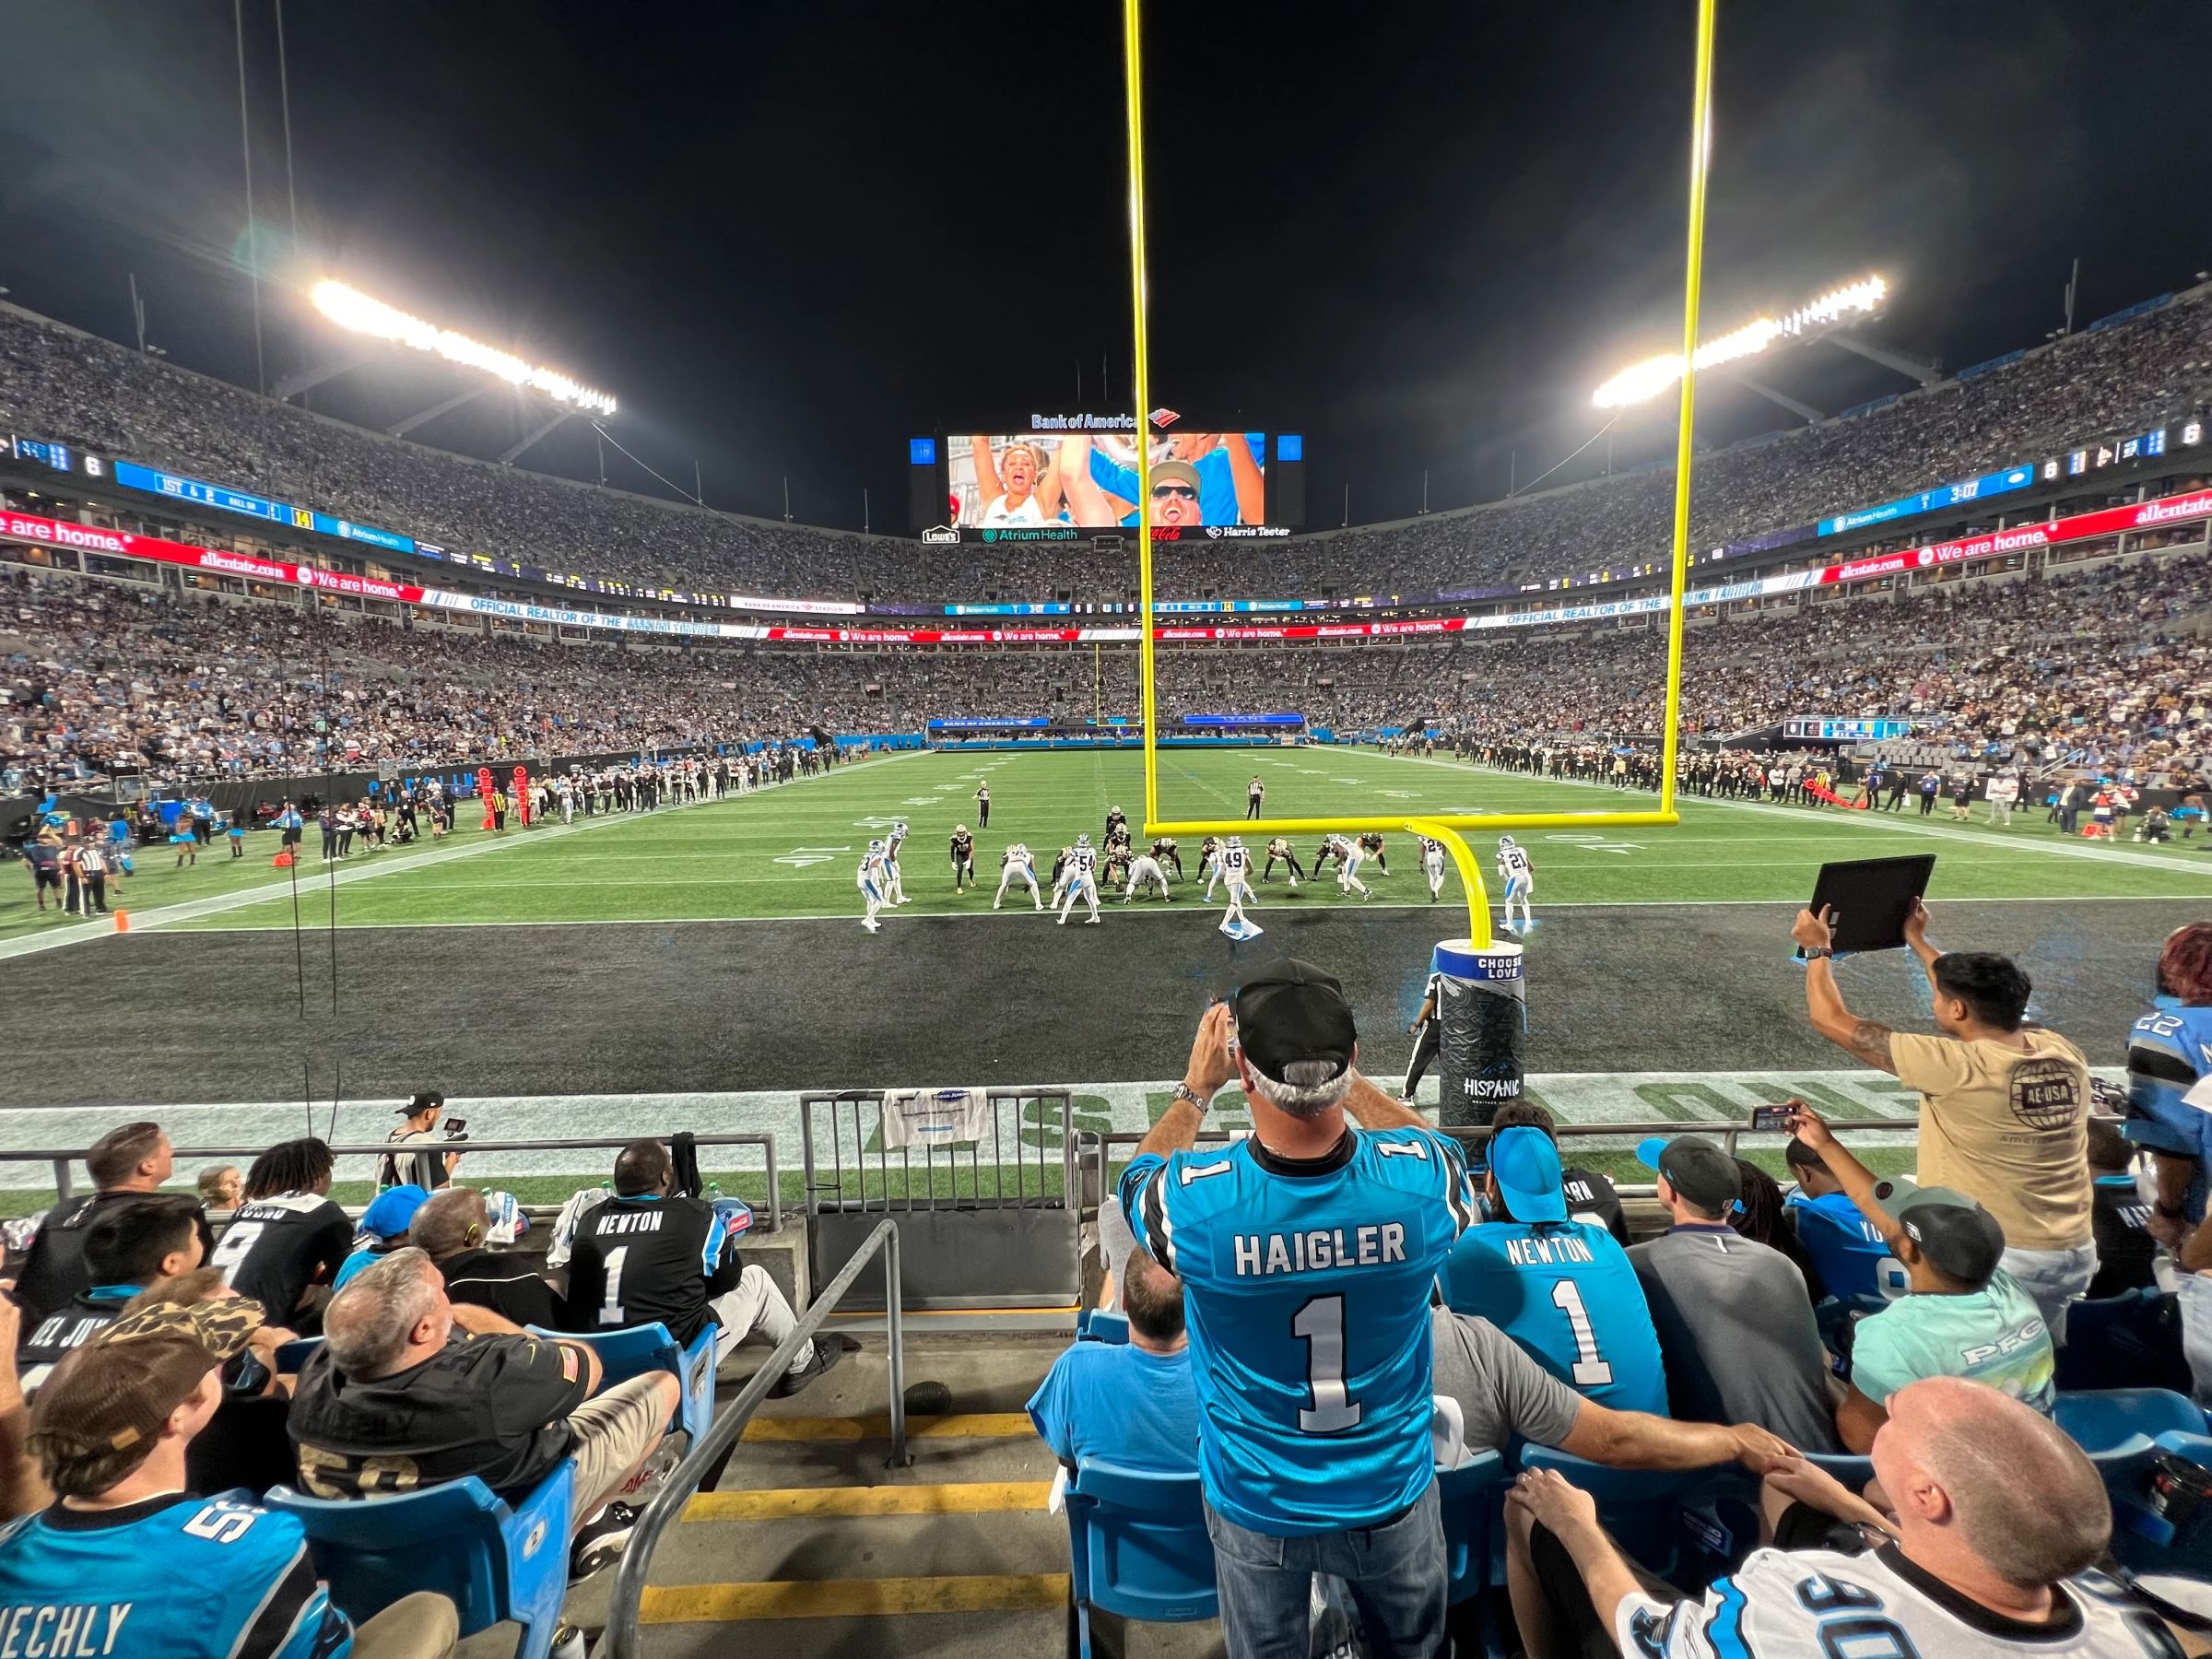 section 121, row 5 seat view  for football - bank of america stadium